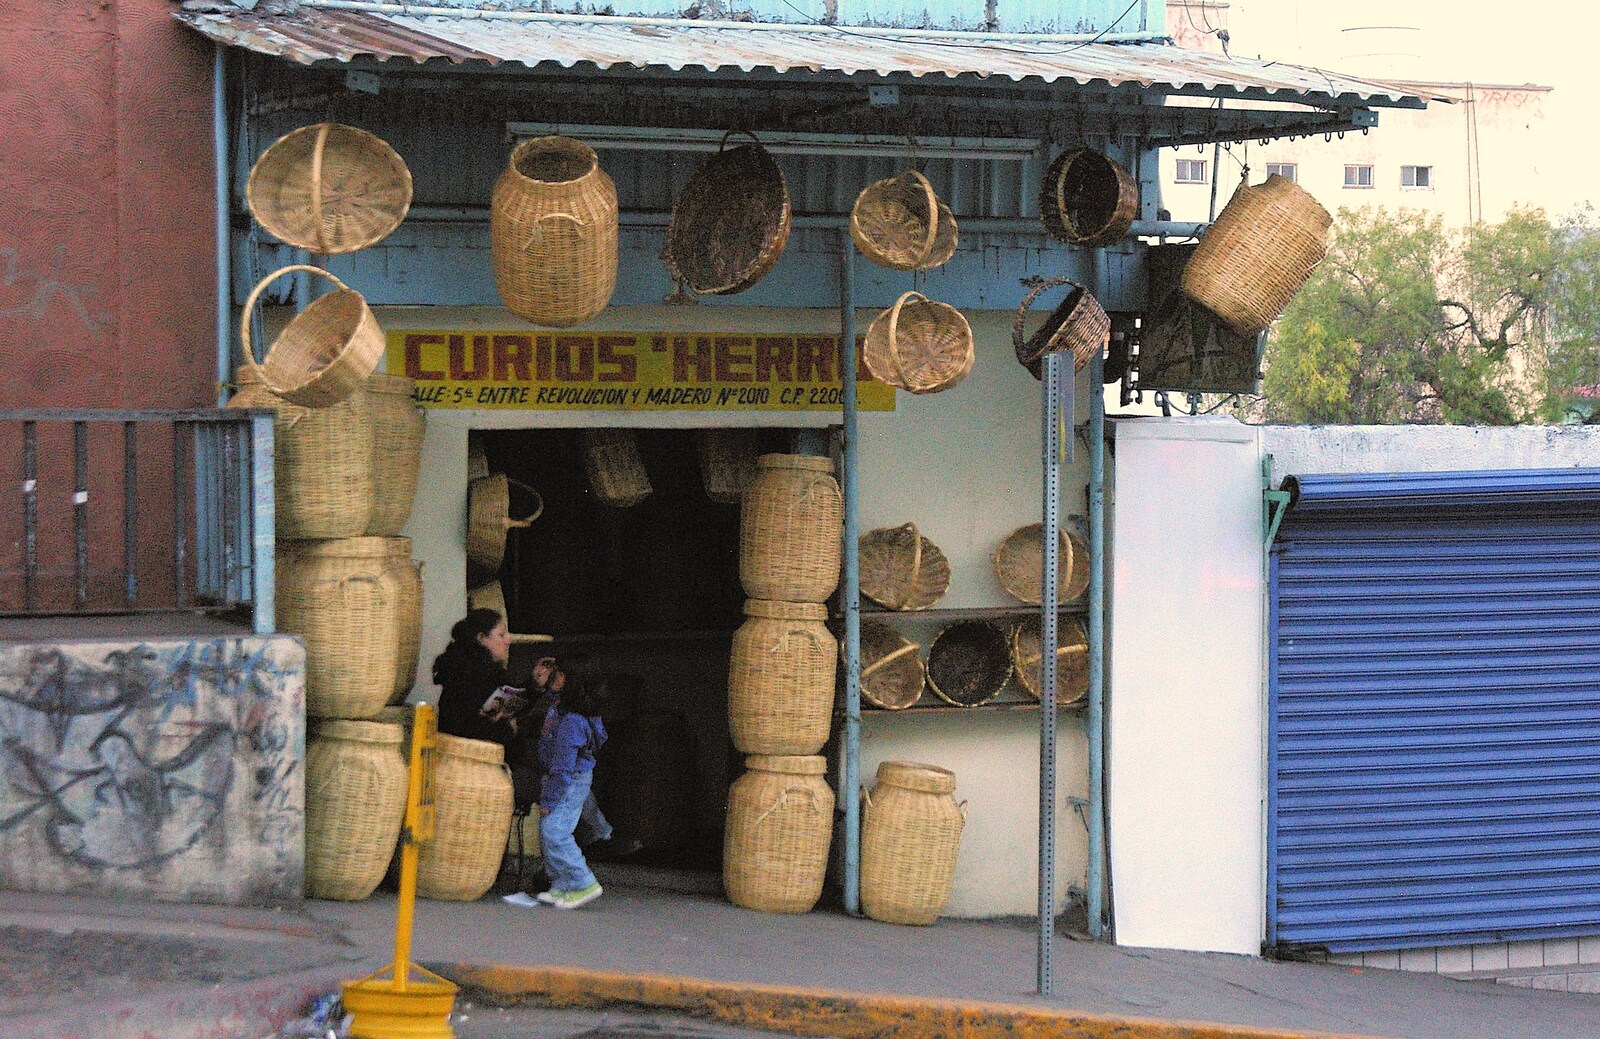 Wicker basket shop from A Trip to Tijuana, Mexico - 25th March 2006